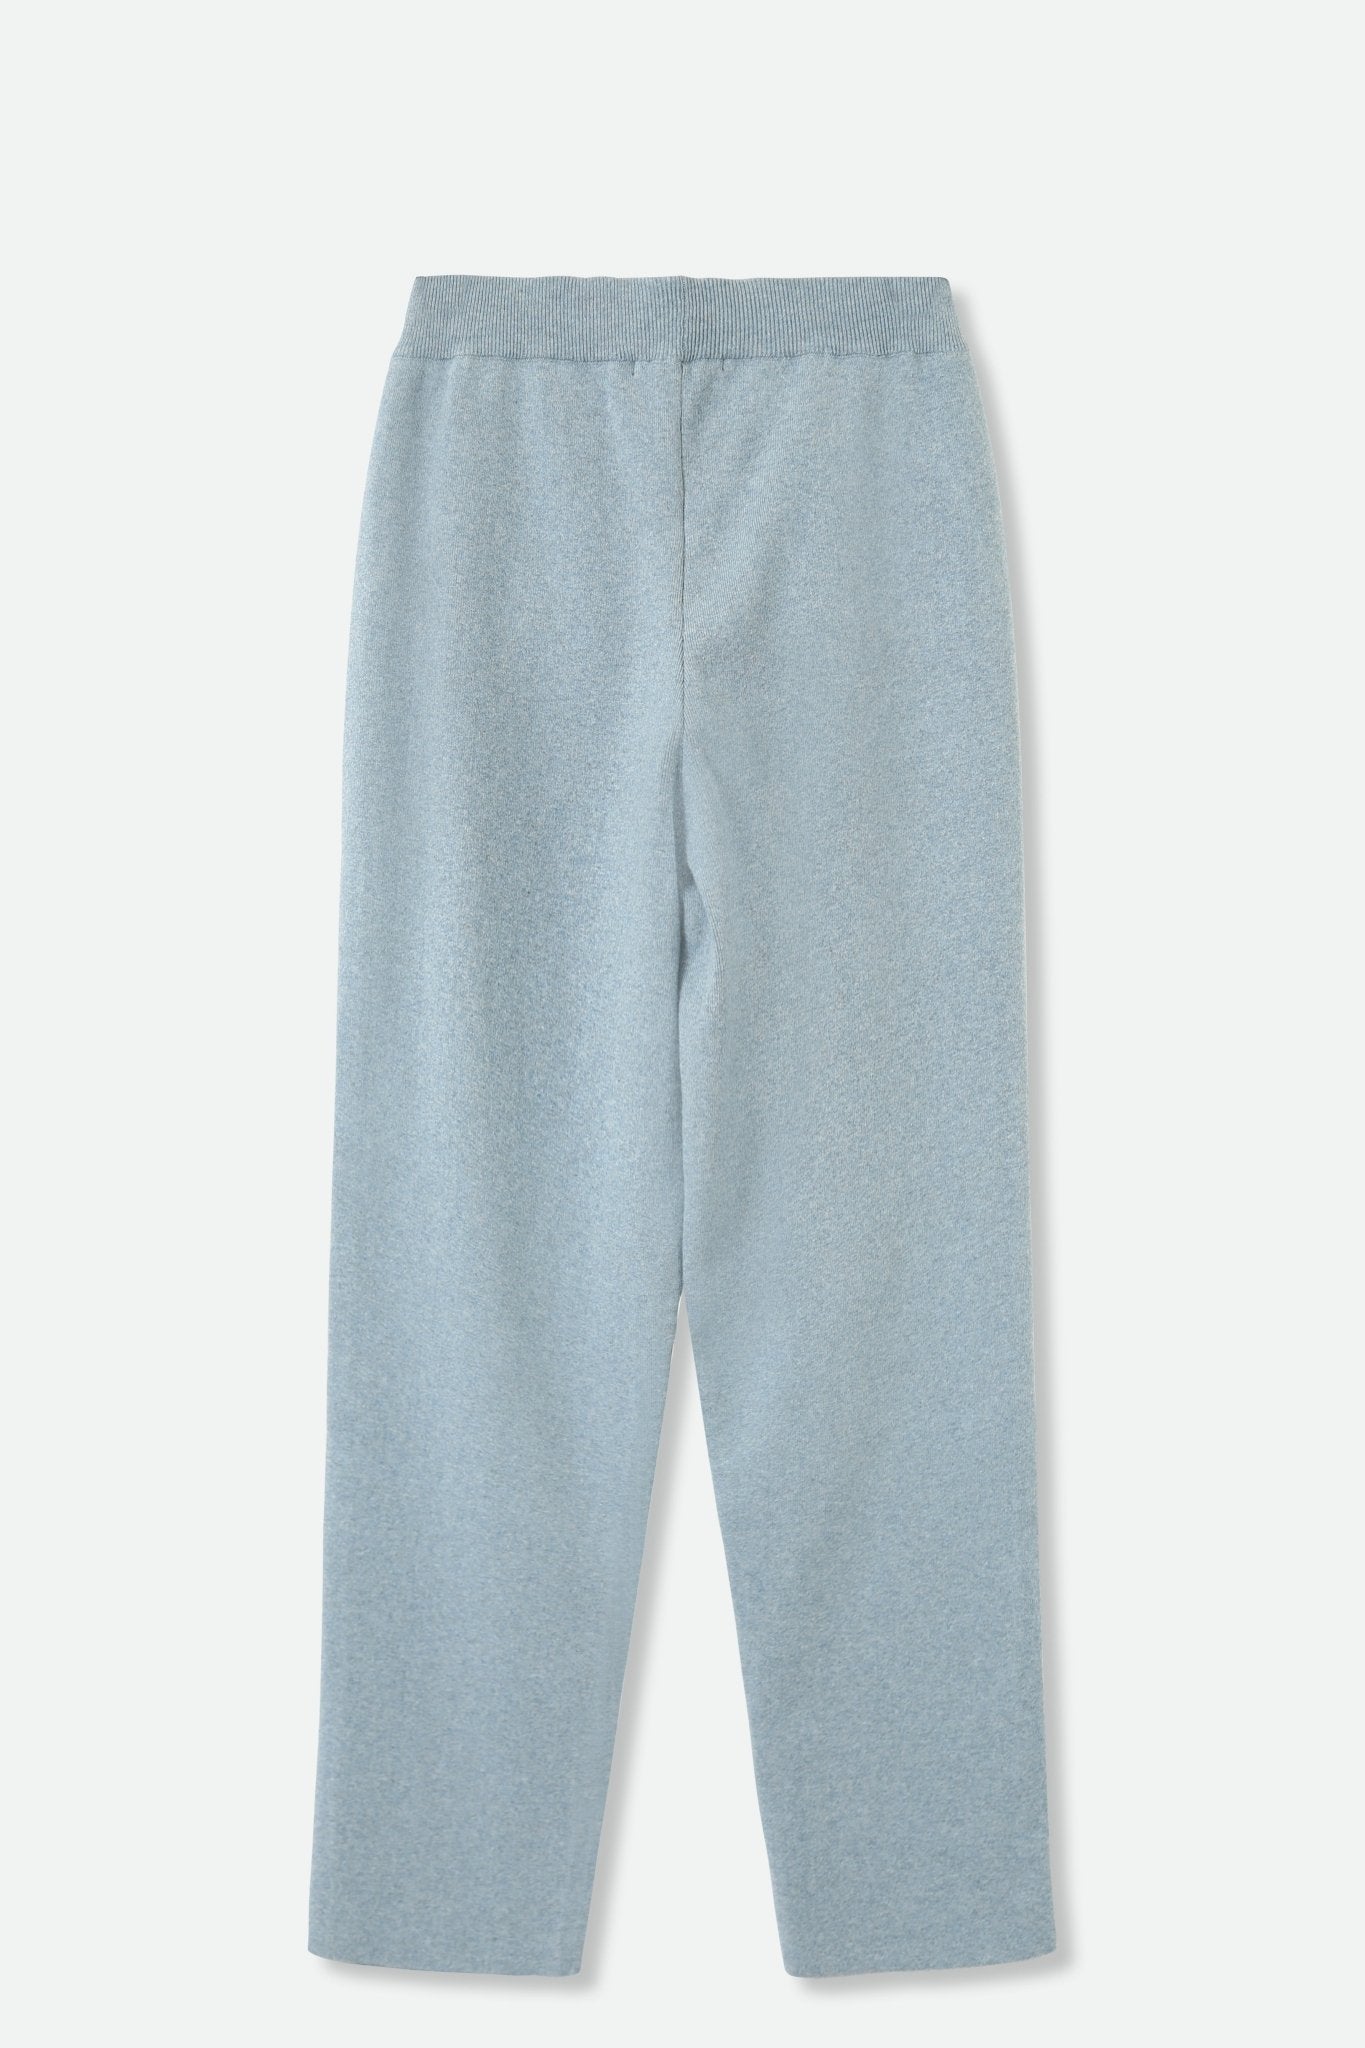 PAIGE PANT IN DOUBLE KNIT HEATHERED PIMA COTTON IN HEATHER MARINE BLUE - Jarbo